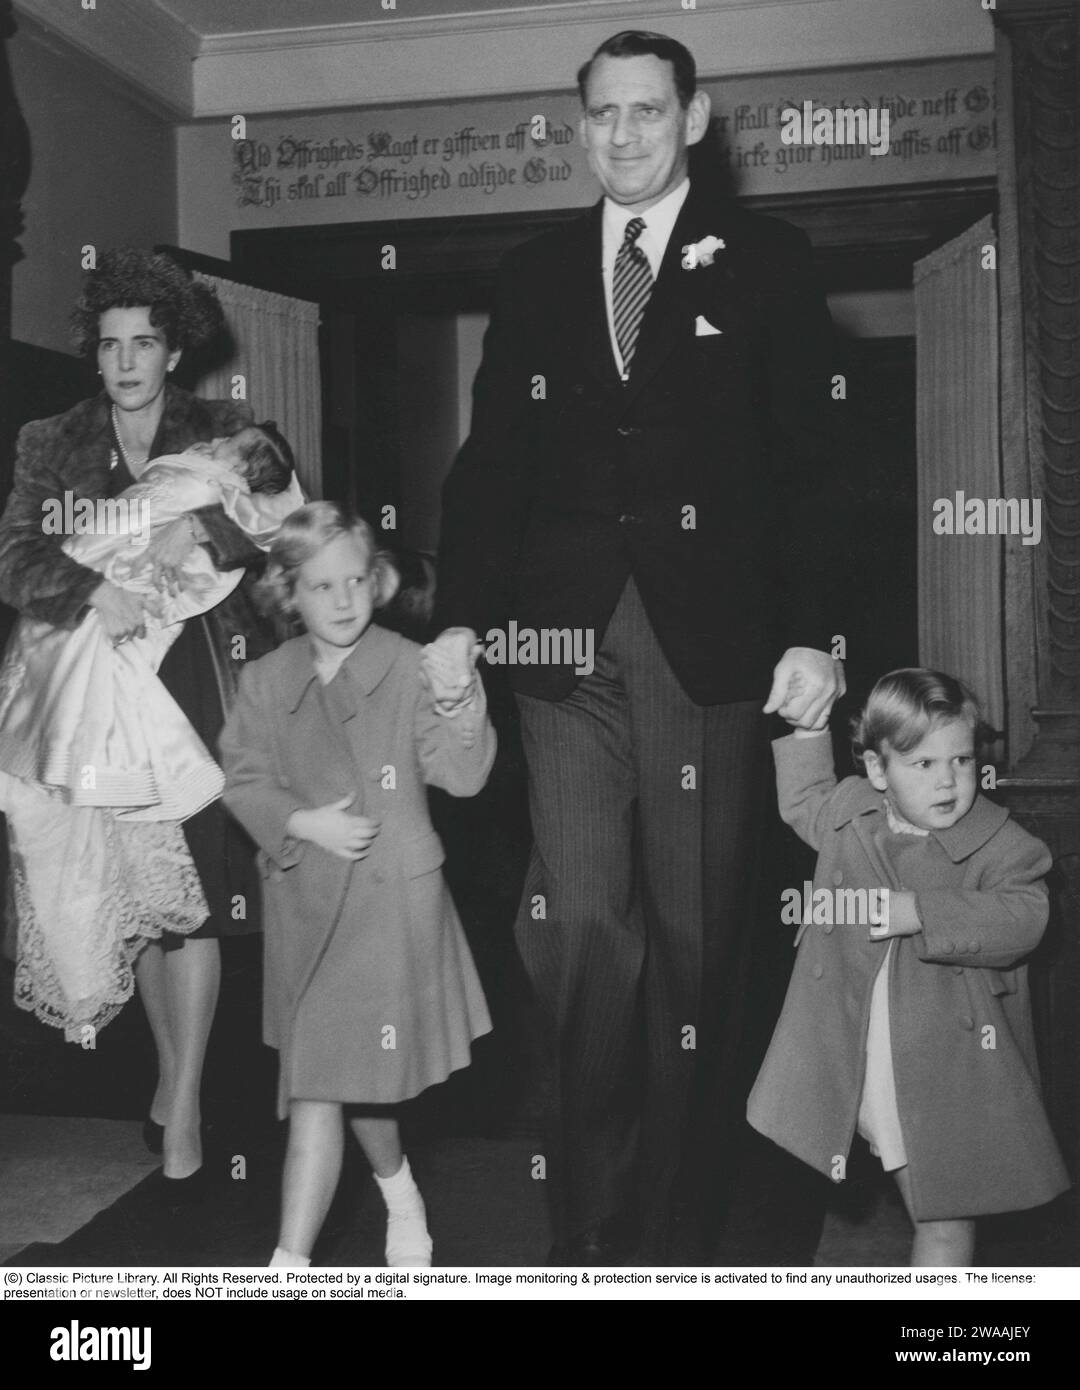 Queen Margrethe II of Denmark. Pictured holding her father King Frederick IX of Denmarks hand with her sister Benedikte. Queen Ingrid carries her daughter Ann-Marie from the Holmen church where she has been christened. 9 october 1946. Stock Photo